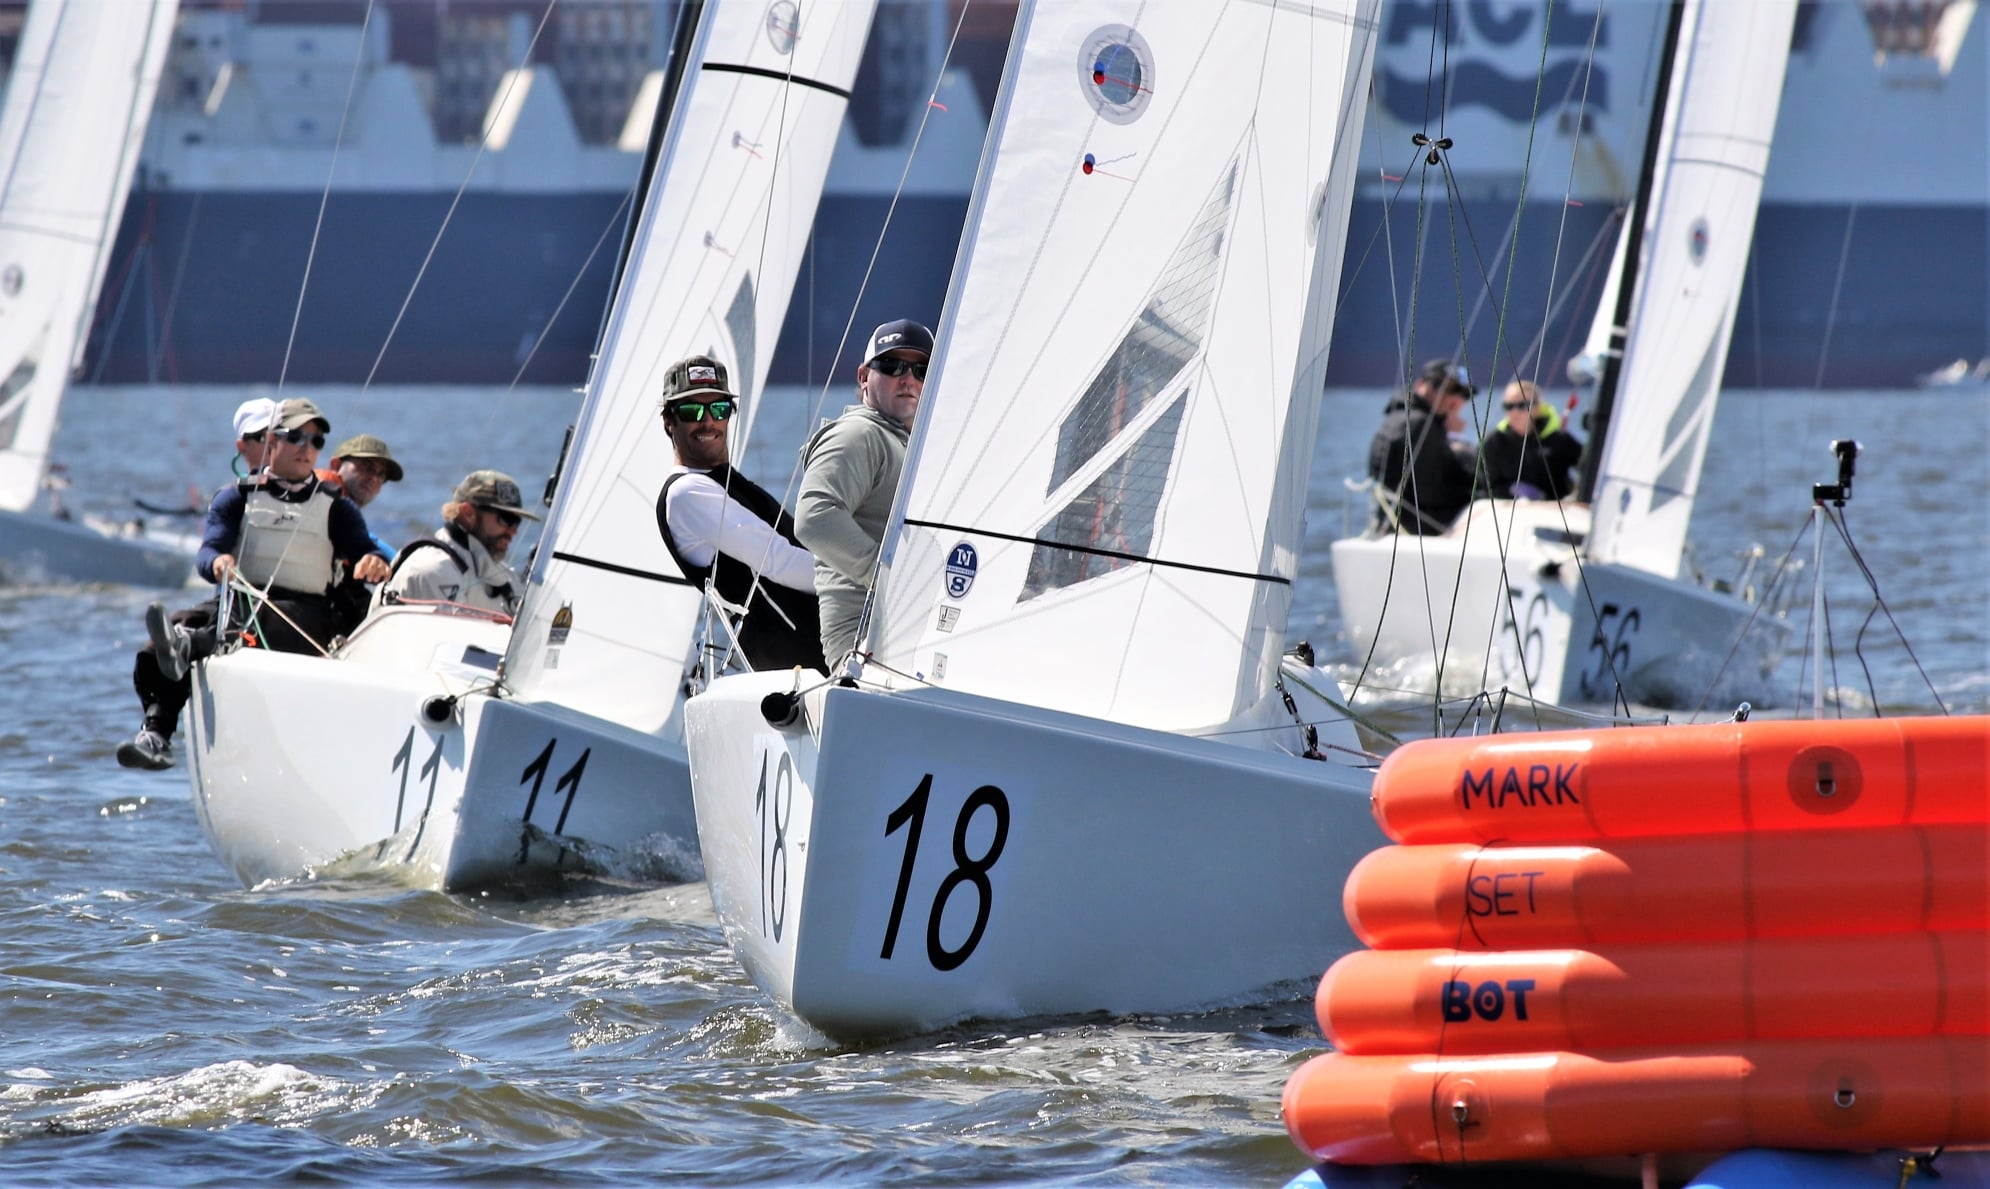  J/70  2021 North American Championship  Annapolis MD  Day 4  No racing on the final day  Peter Duncan, Rye, NY declared Champion